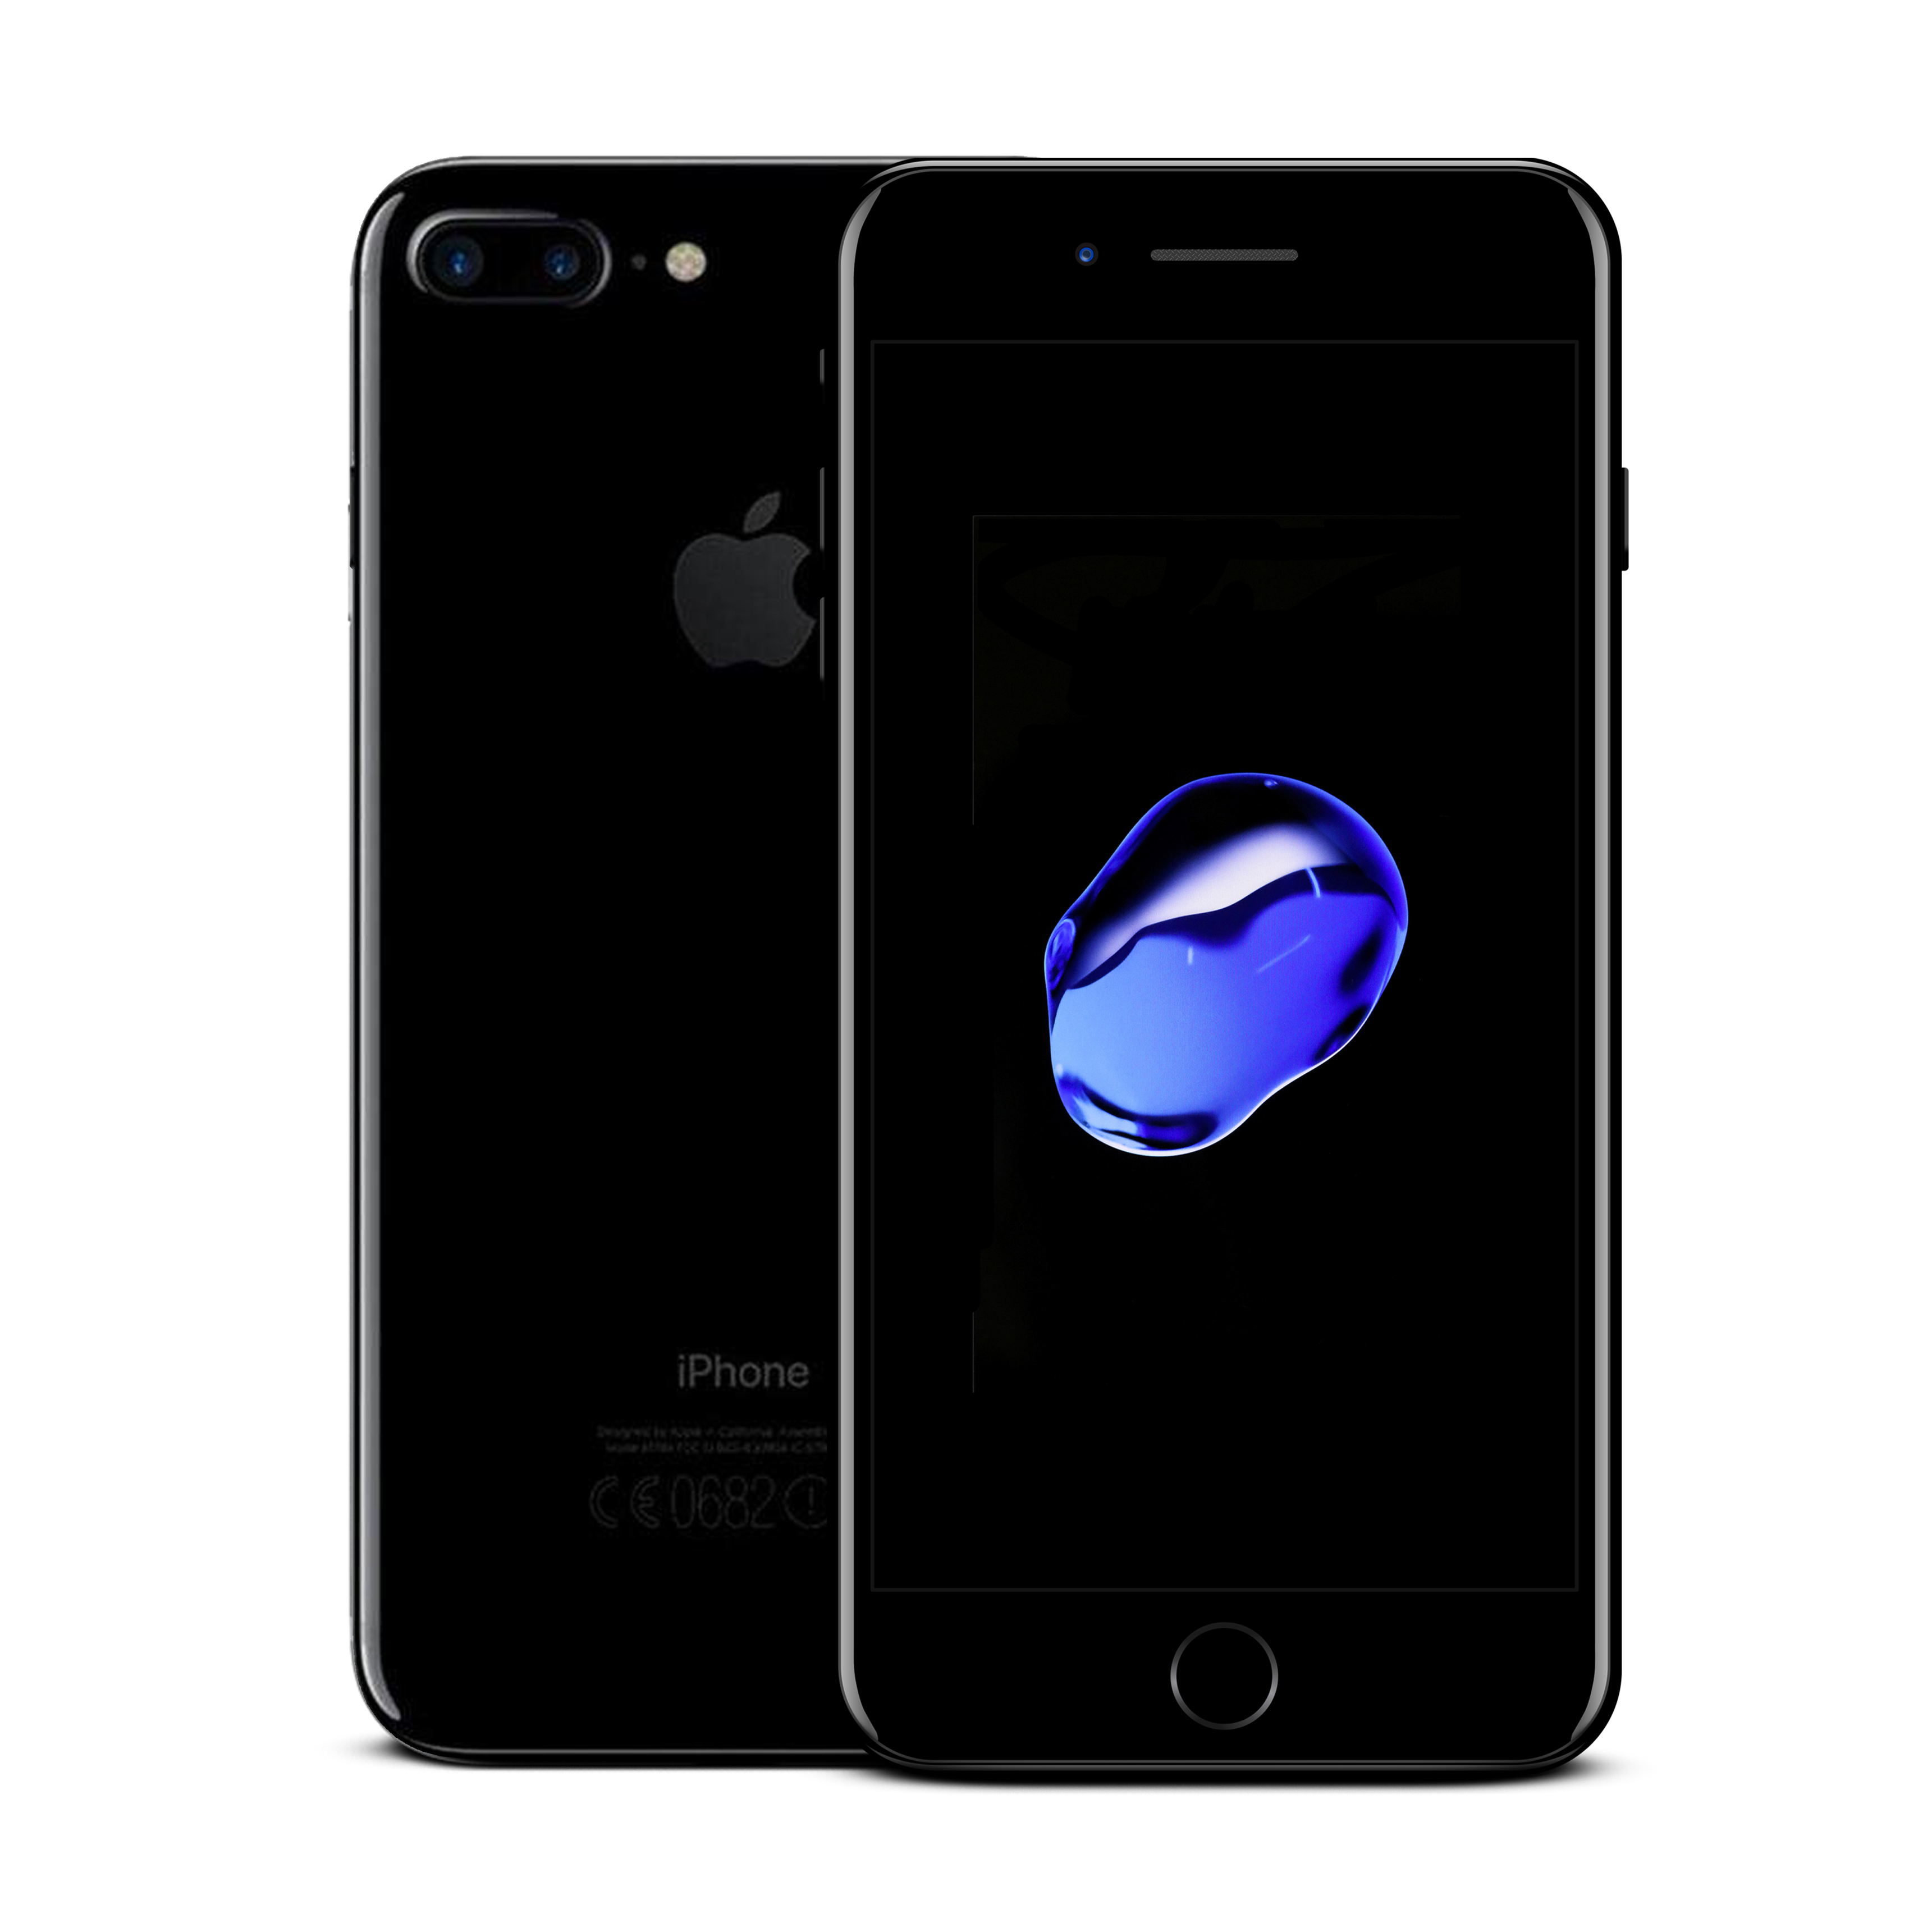 iPhone 7 Plus 128GB Jet Black - Prices from €229,00 - Swappie